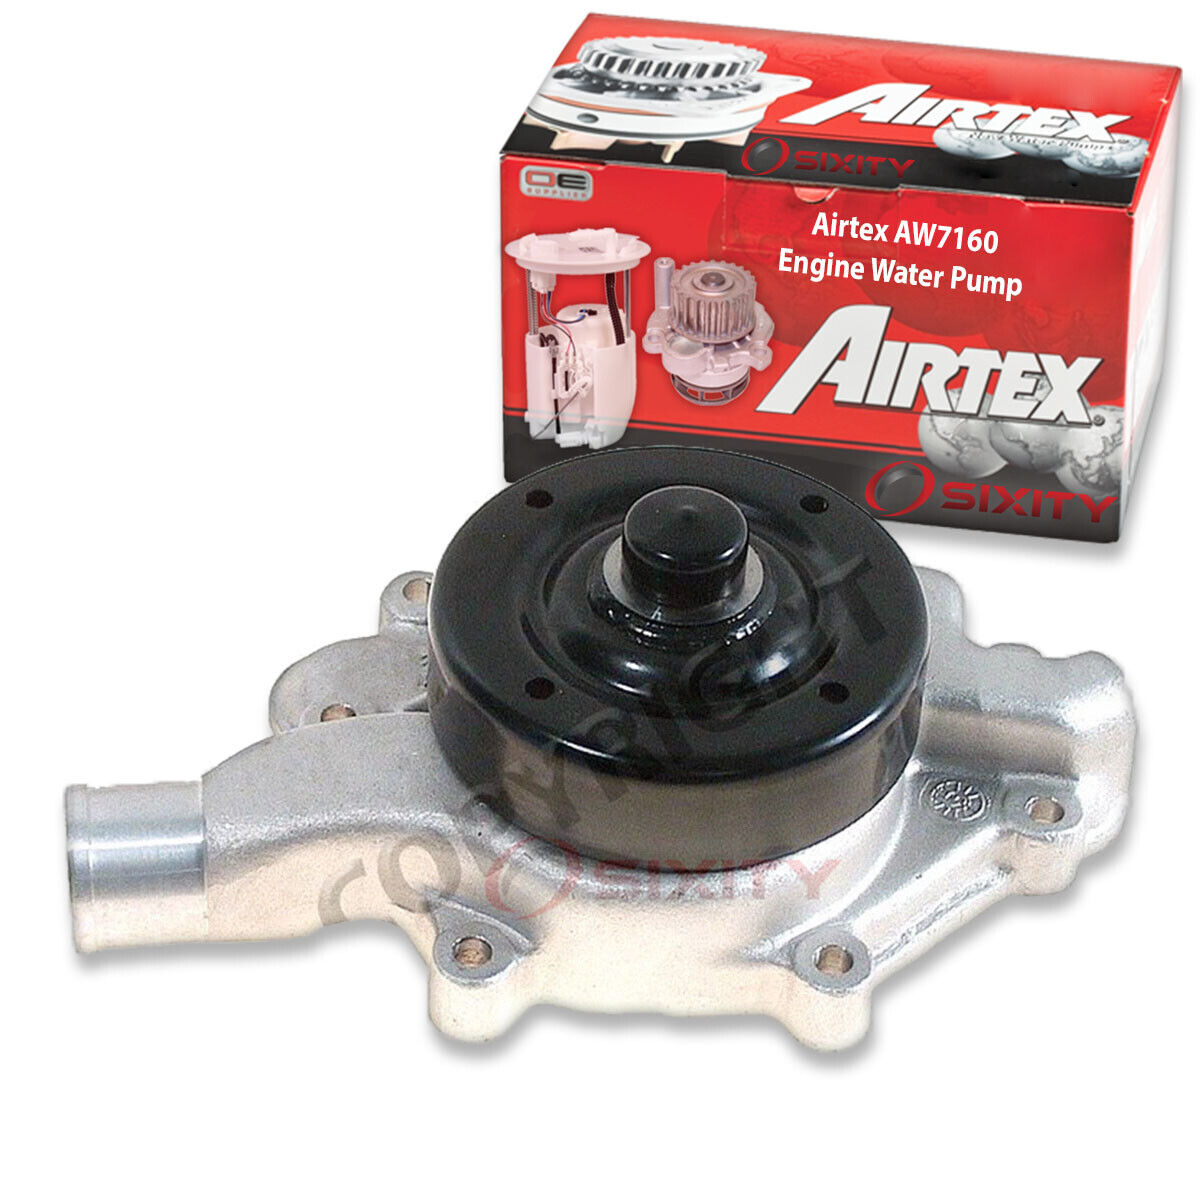 Airtex AW7160 Engine Water Pump for WP1130 WP-9126 WH7032 W9126M US7160 kz